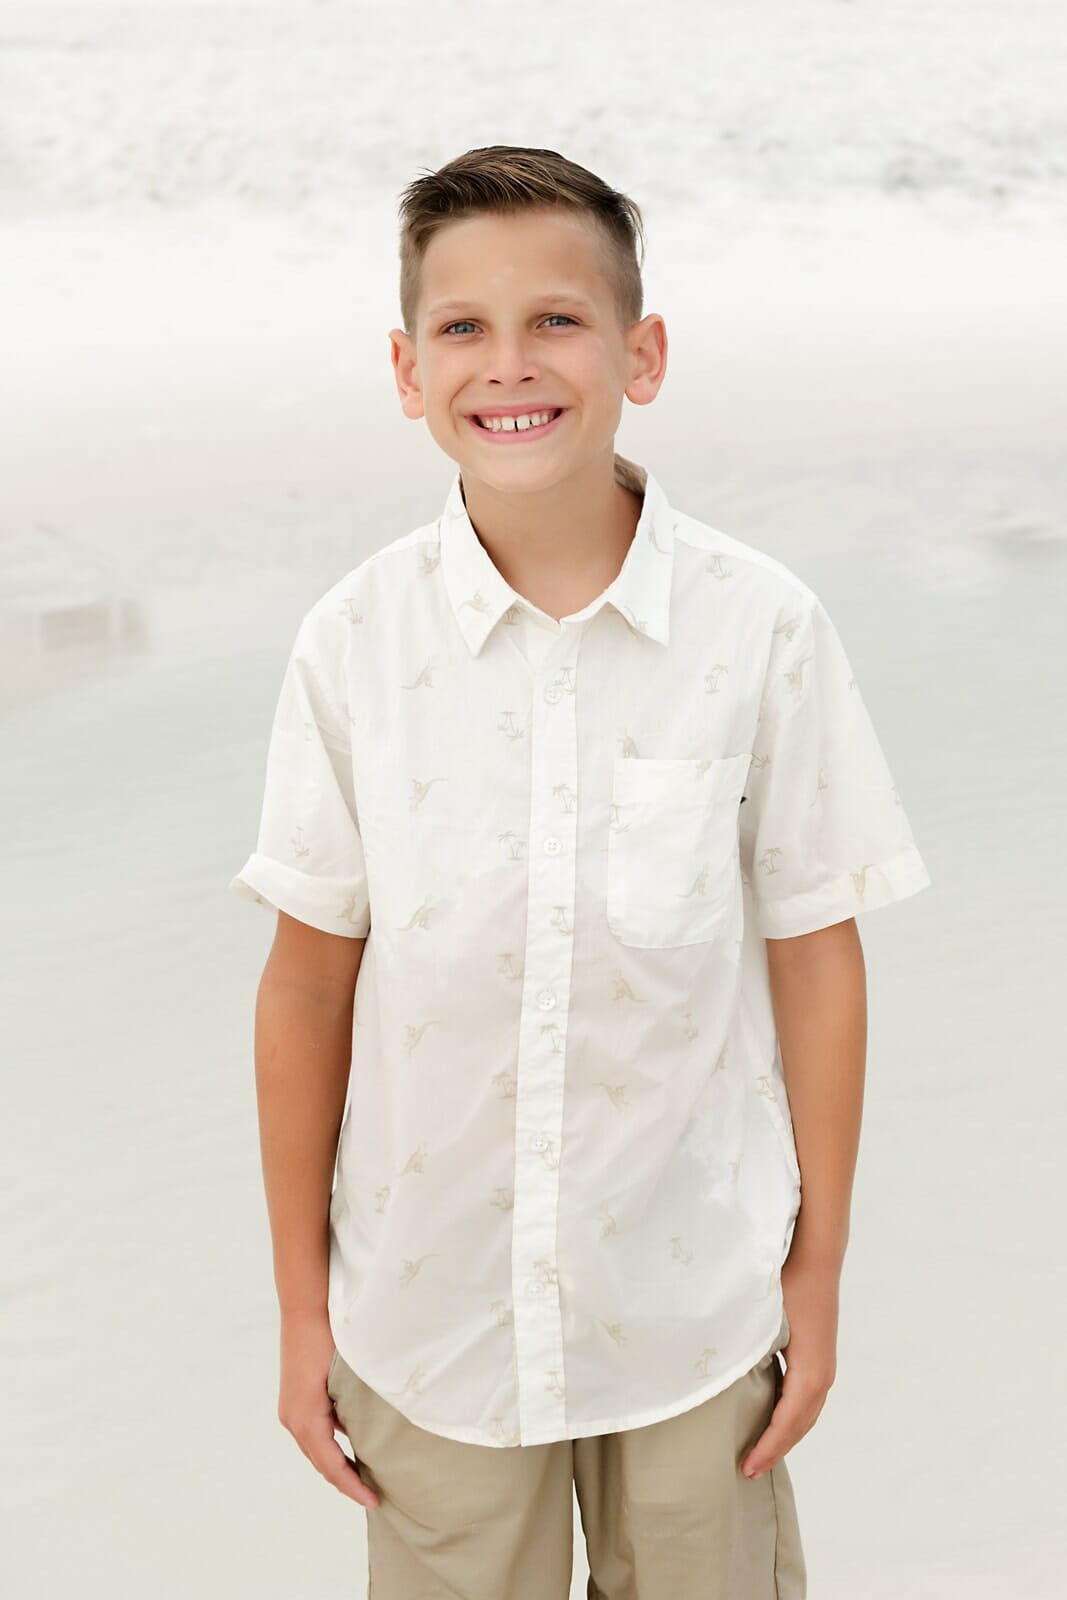 A young boy in a white shirt standing on the beach Destin Holiday Isle.